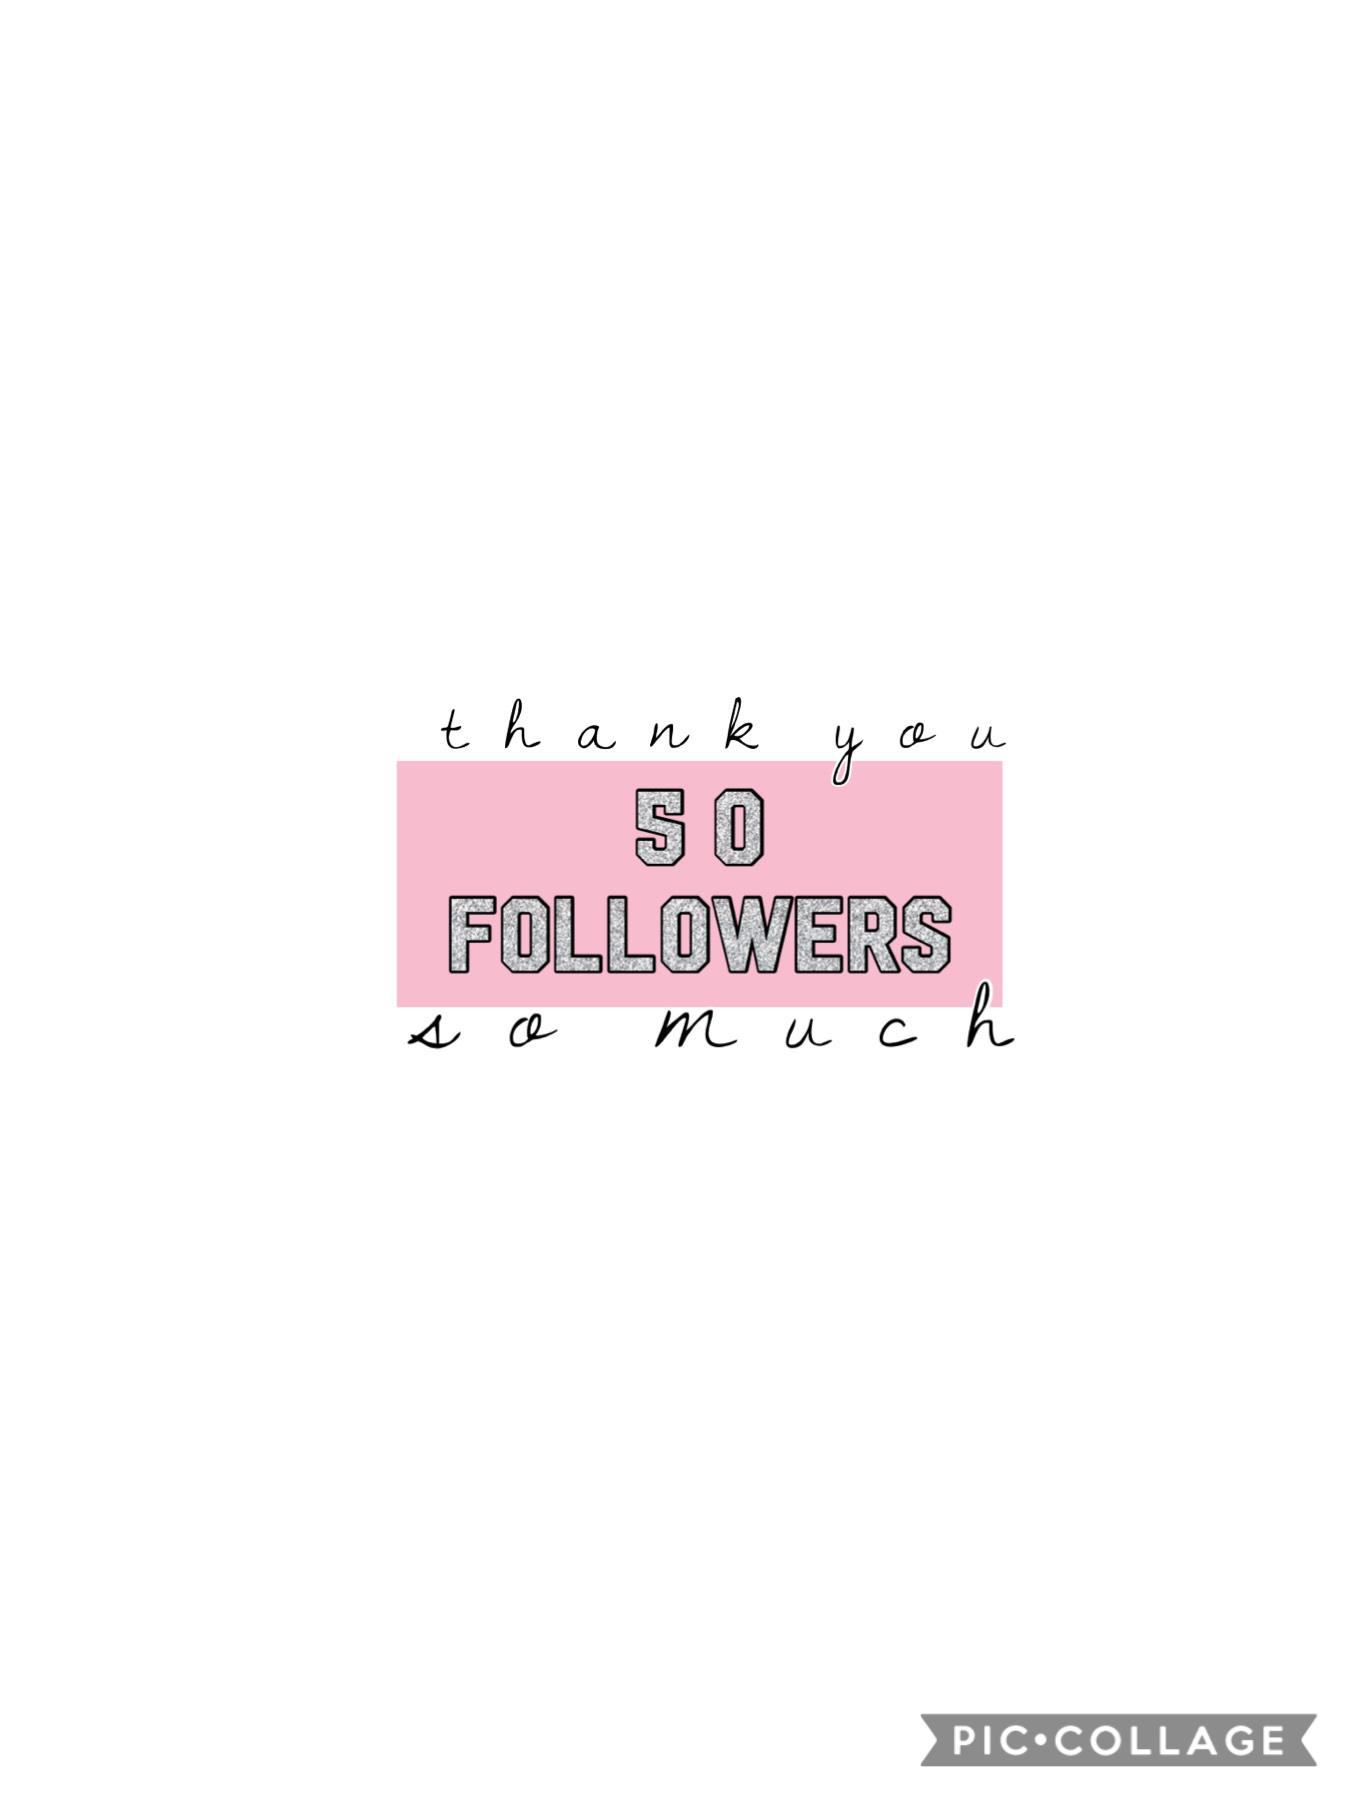 💞tap💞

Thank you so much guys, I know it’s only fifty but something smal can lead to something beautiful.
-stellarflower